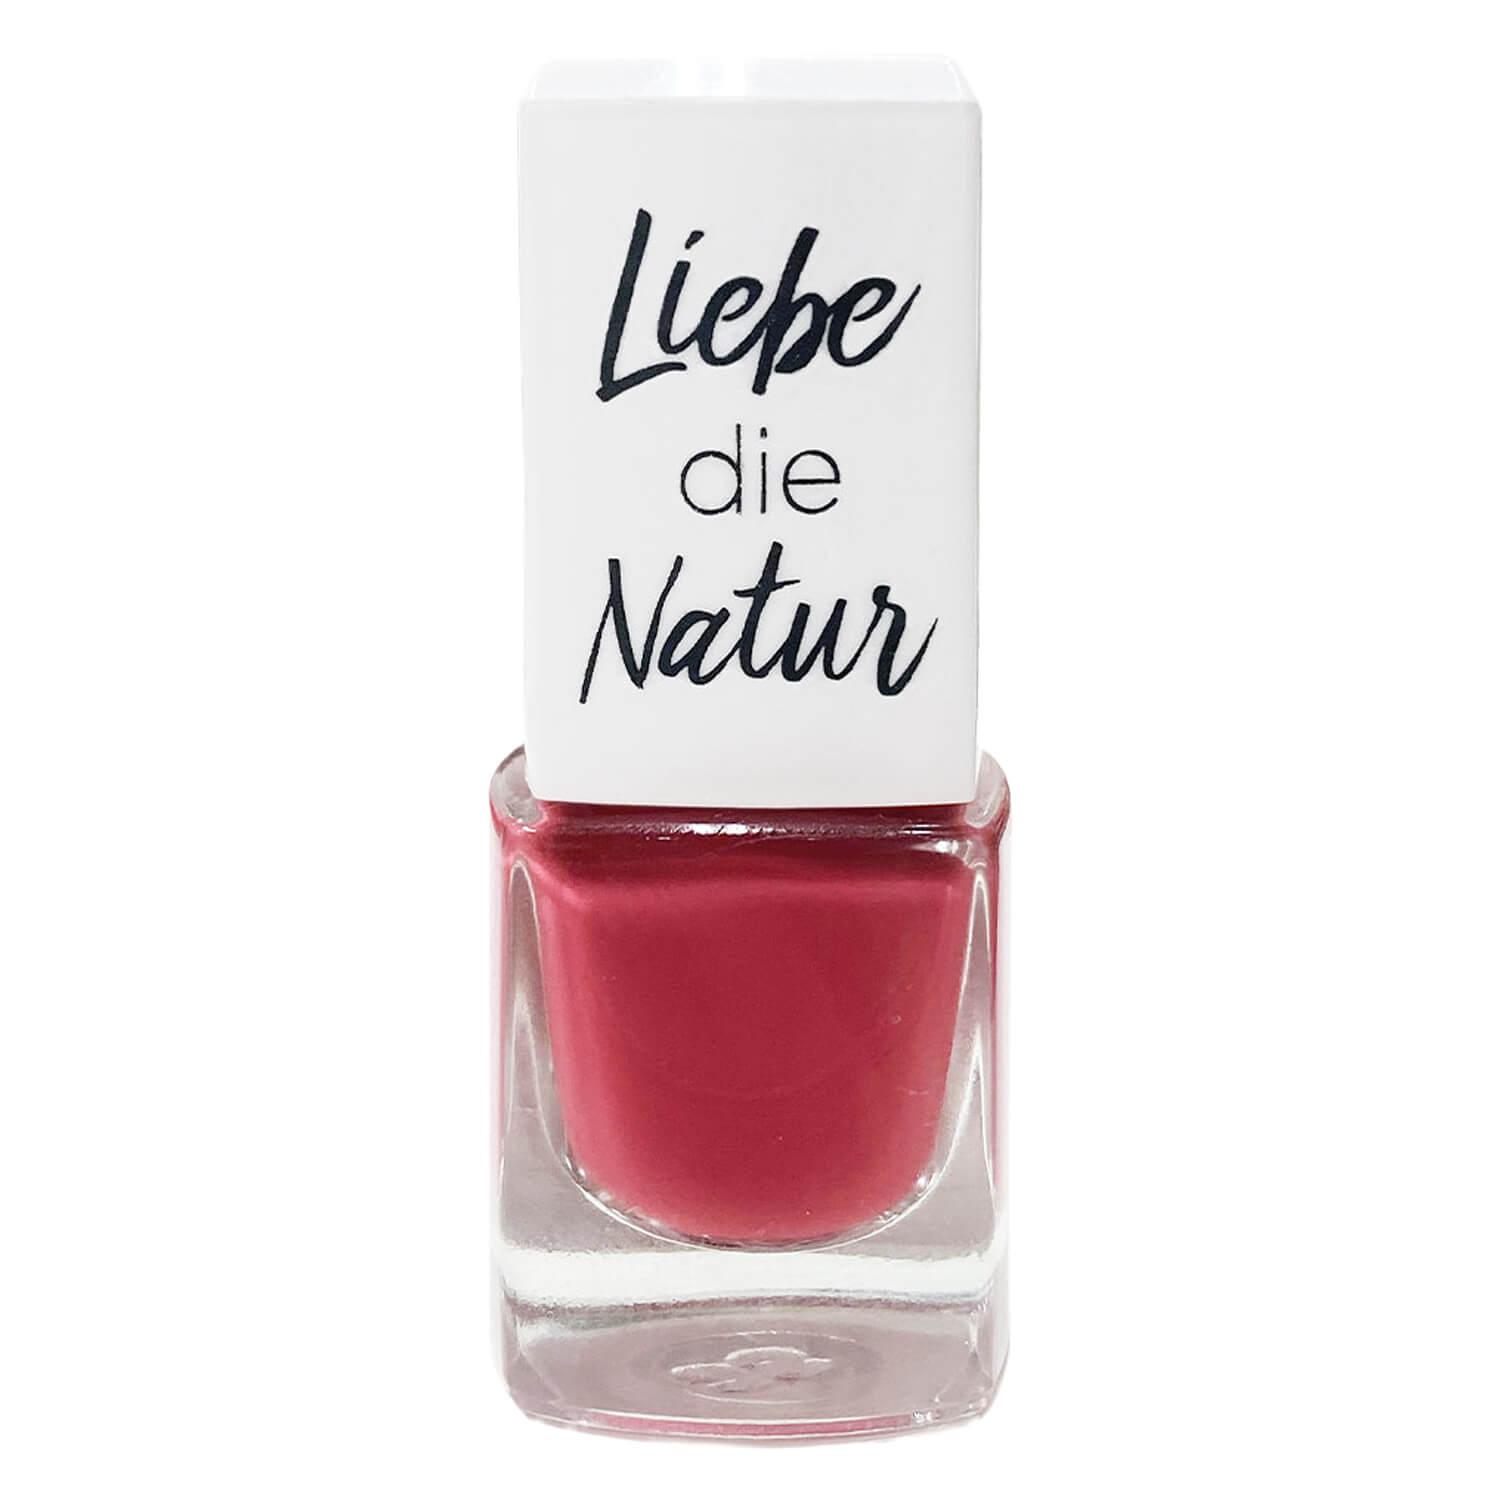 Liebe die Natur - Vernis à ongles naturel very berry